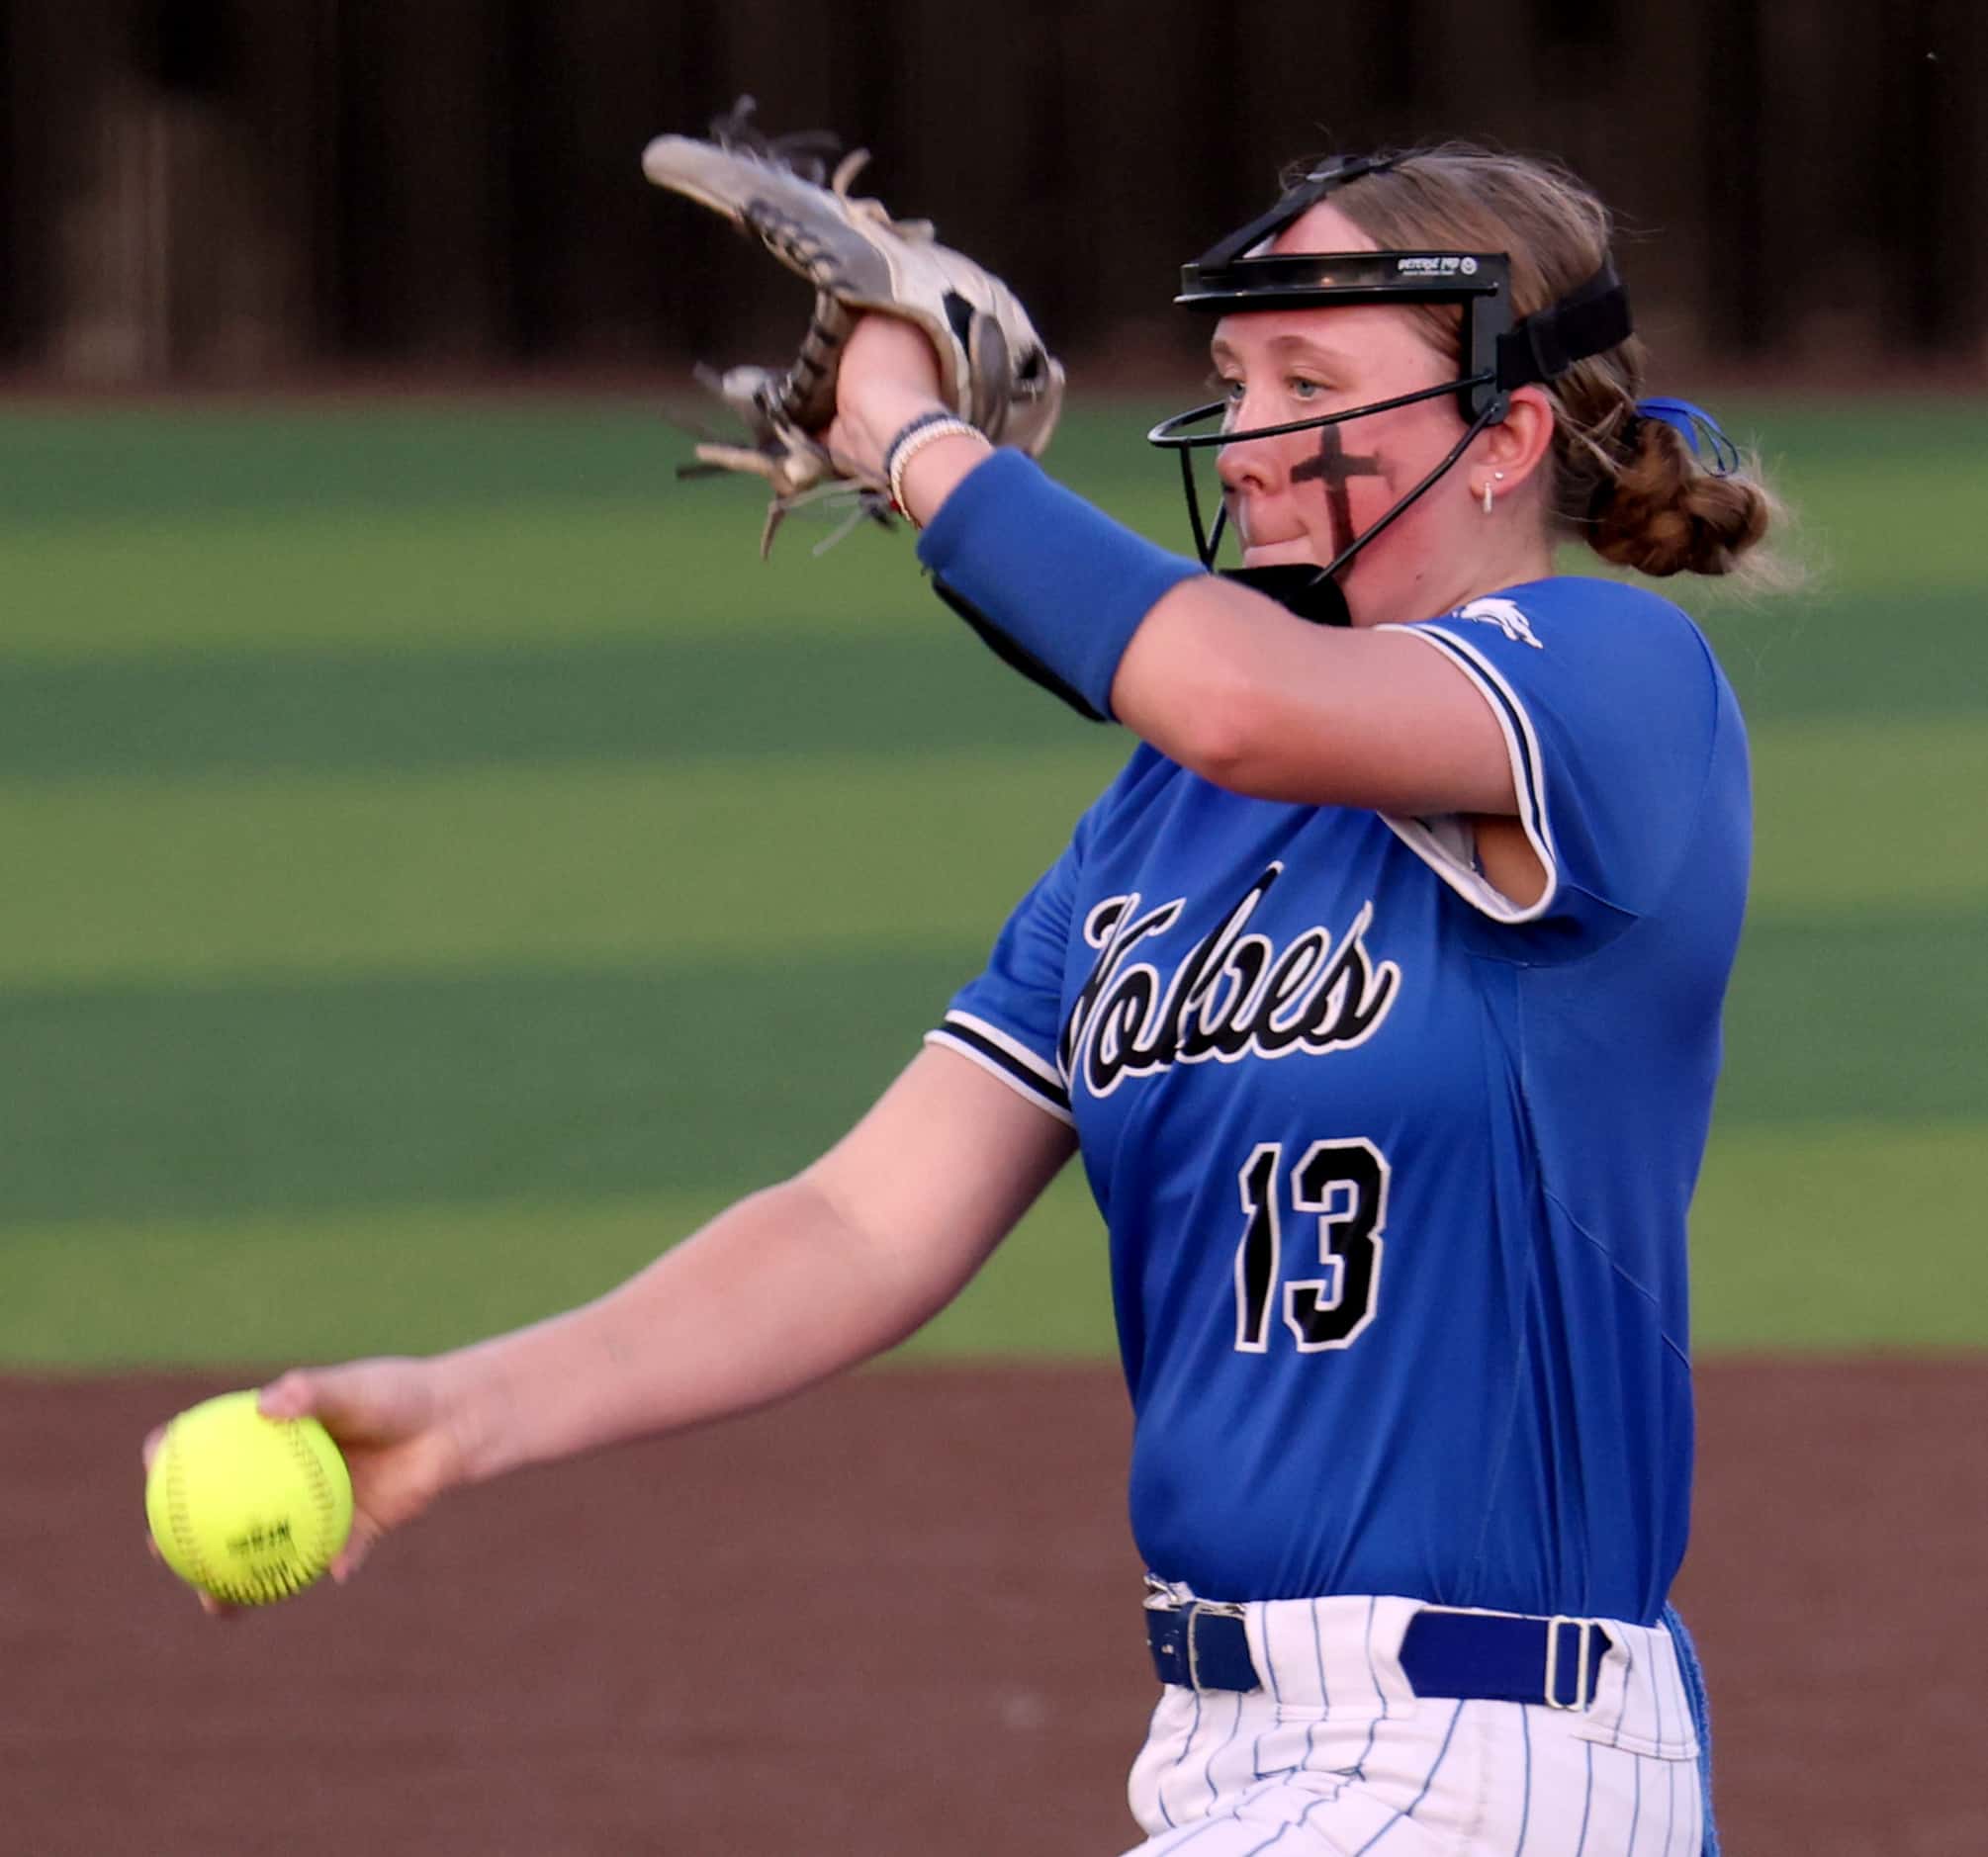 Plano West pitcher Carra Cleaves (13) delivers a pitch to a Keller batter in the top of the...